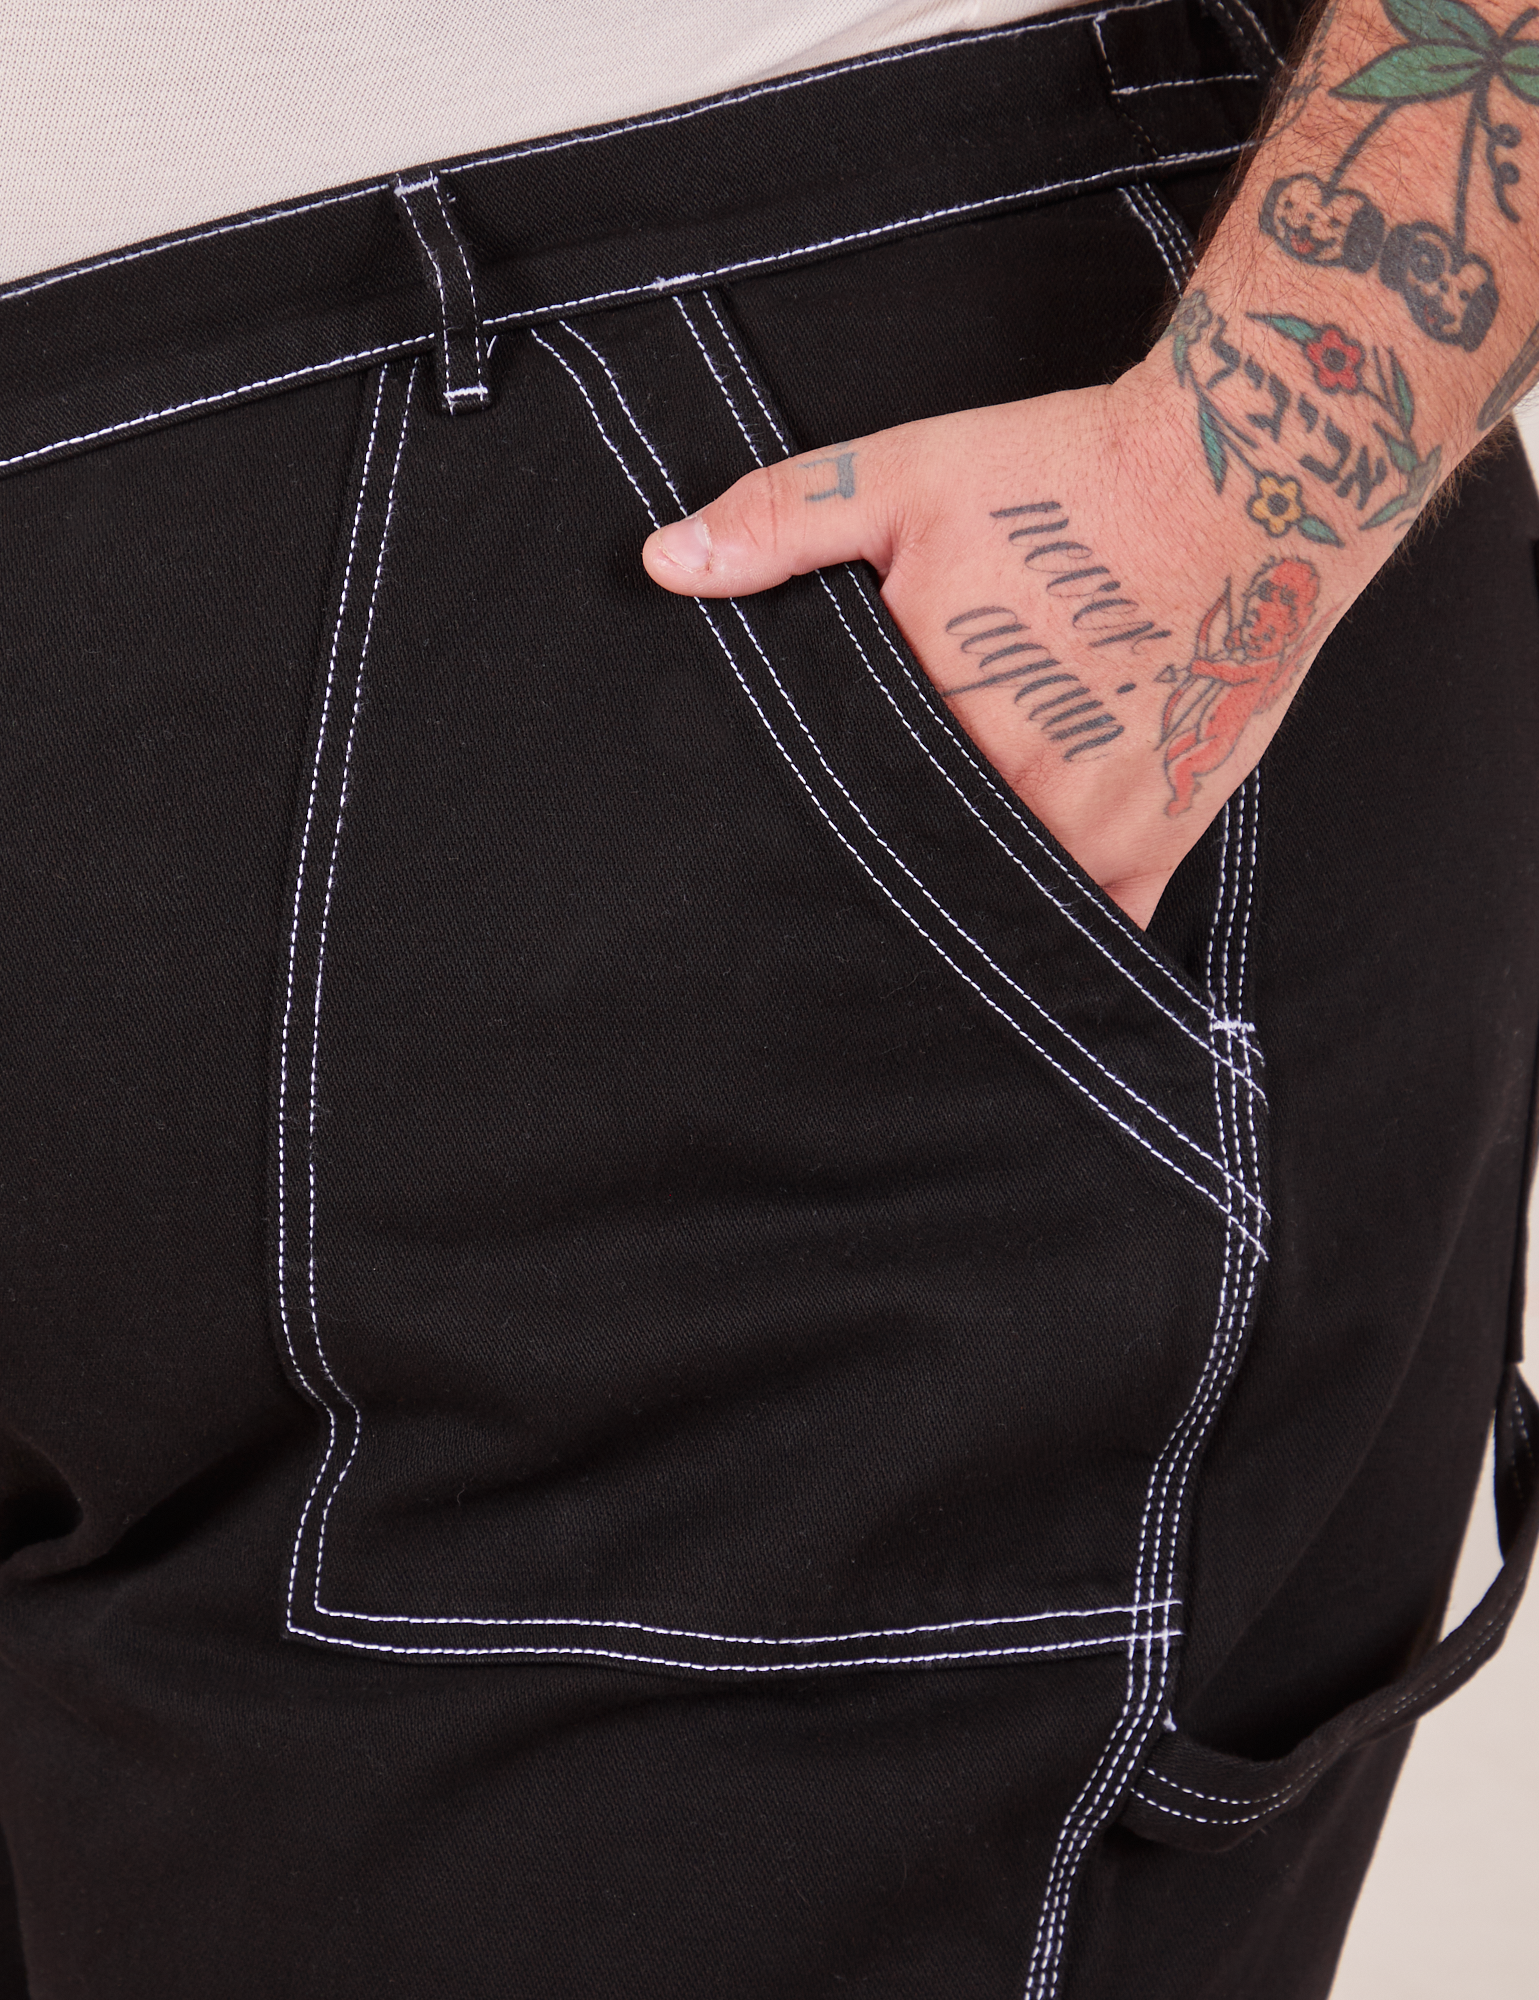 Front pocket close up of Carpenter Jeans in Black. Contrast white top stitching along edges of pocket. Sam has their hand in the pocket.